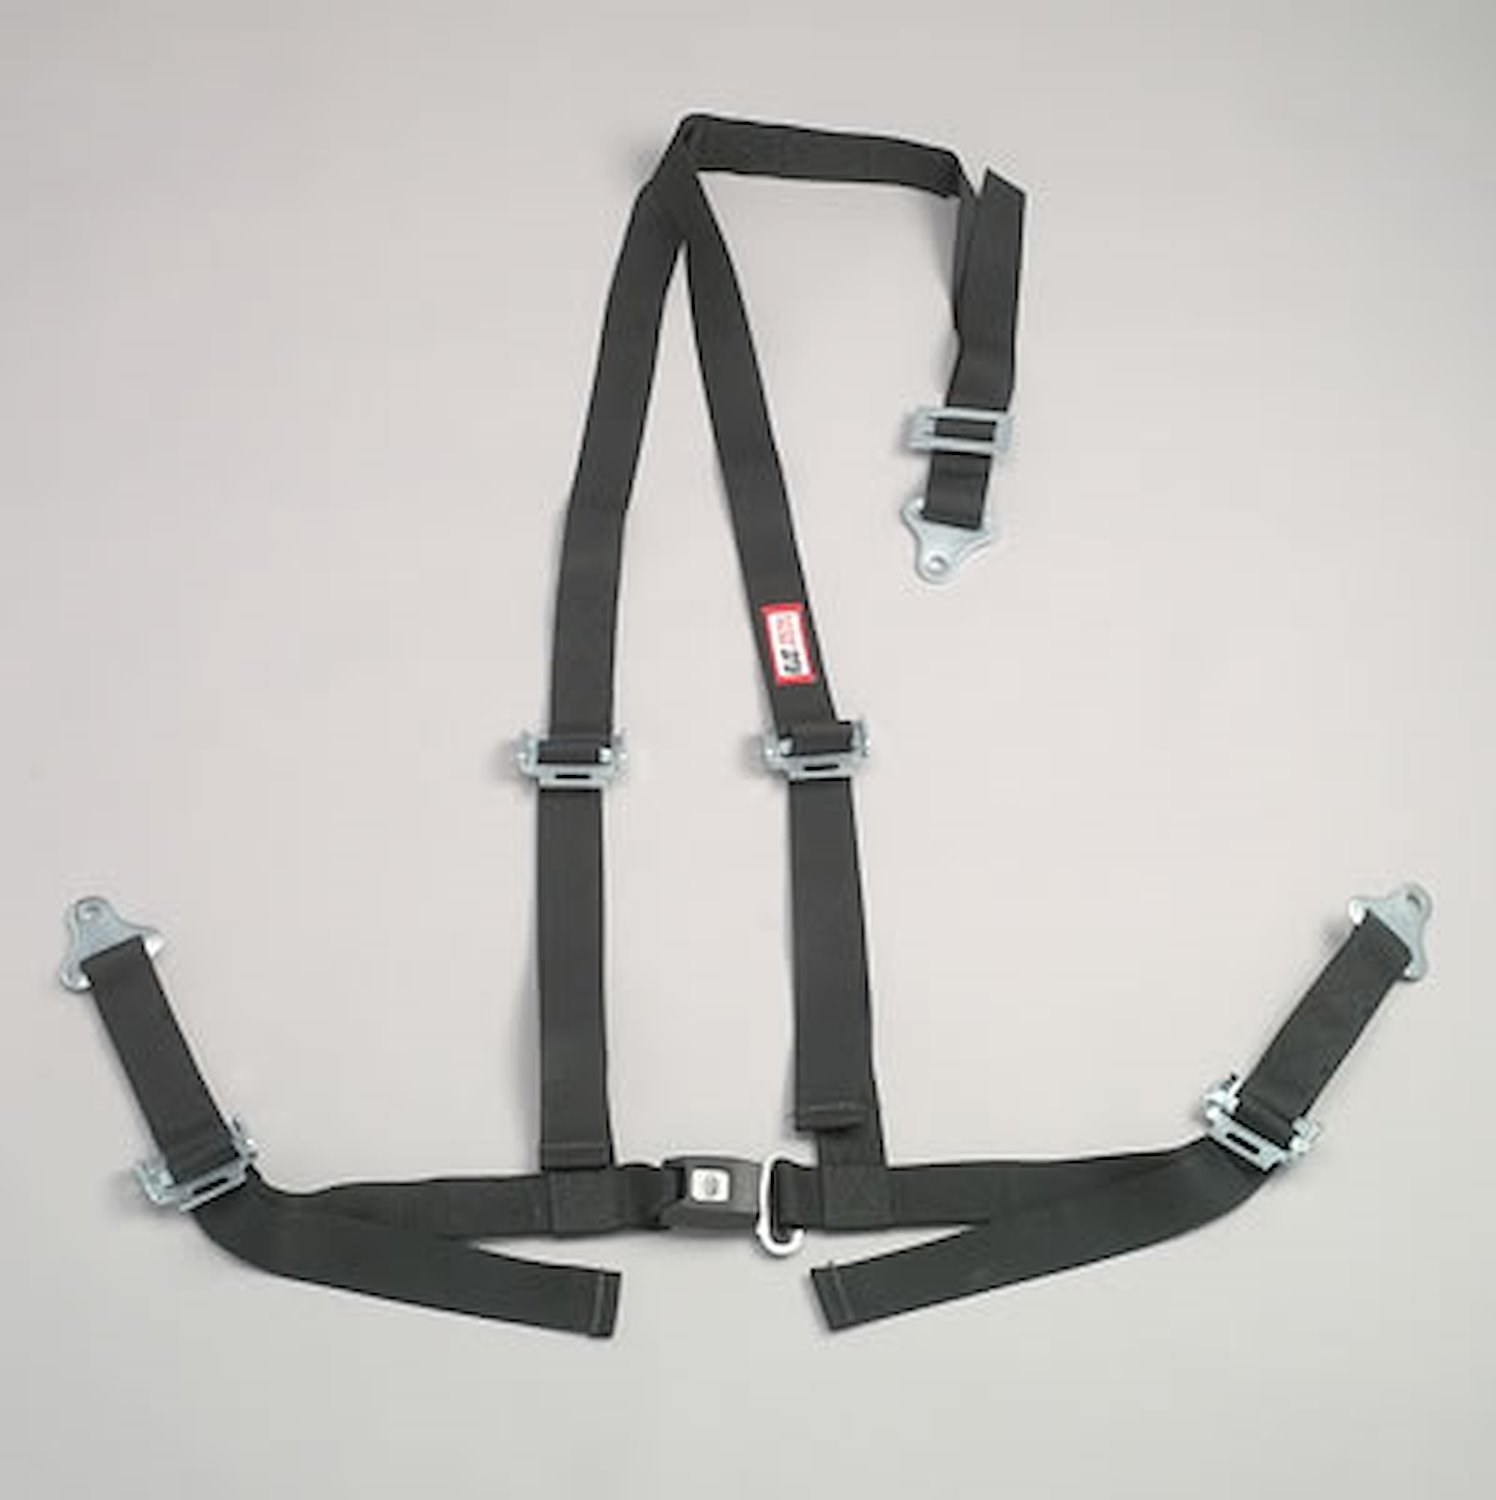 NON-SFI B&T HARNESS 2 PULL UP Lap Belt SNAP 2 S. H. Individual ROLL BAR Mount WRAP/BOLT YELLOW